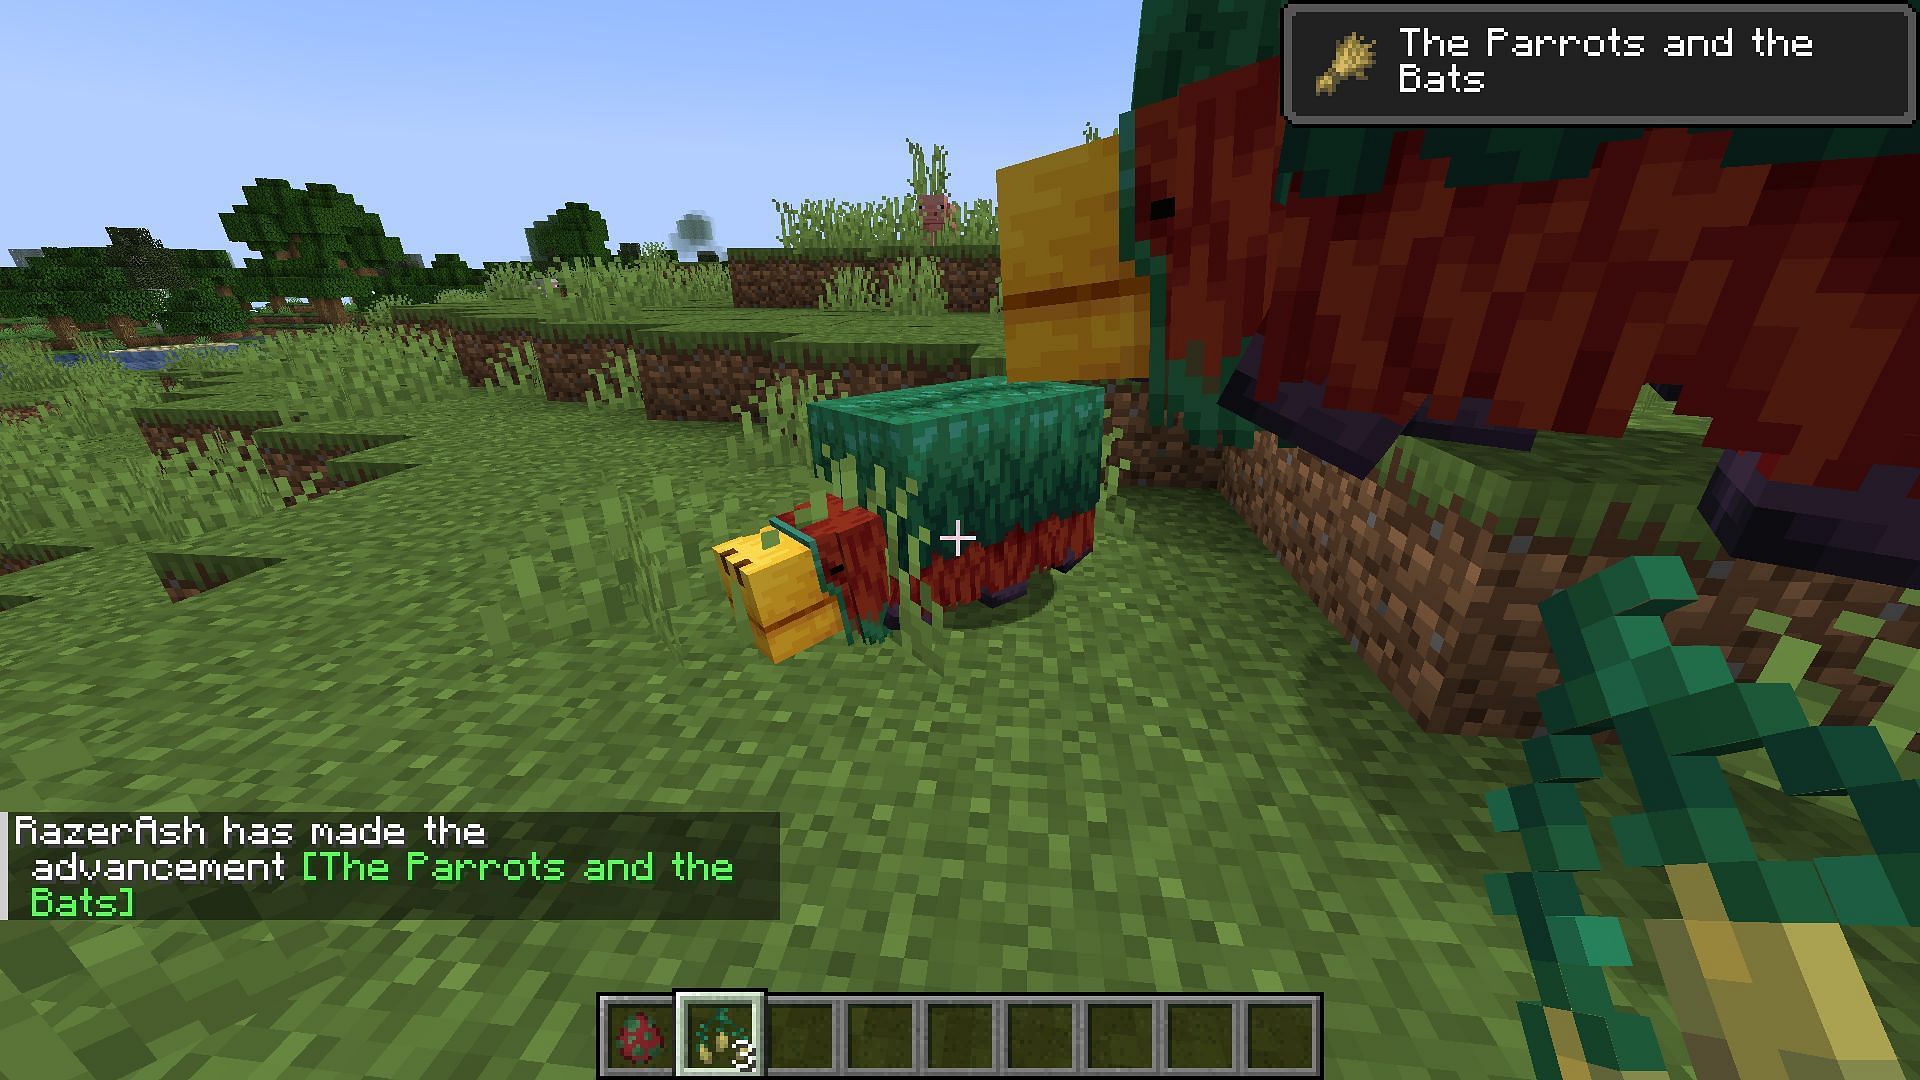 Torchflower seeds will allow Sniffers to breed in Minecraft 1.20 update (Image via Mojang)